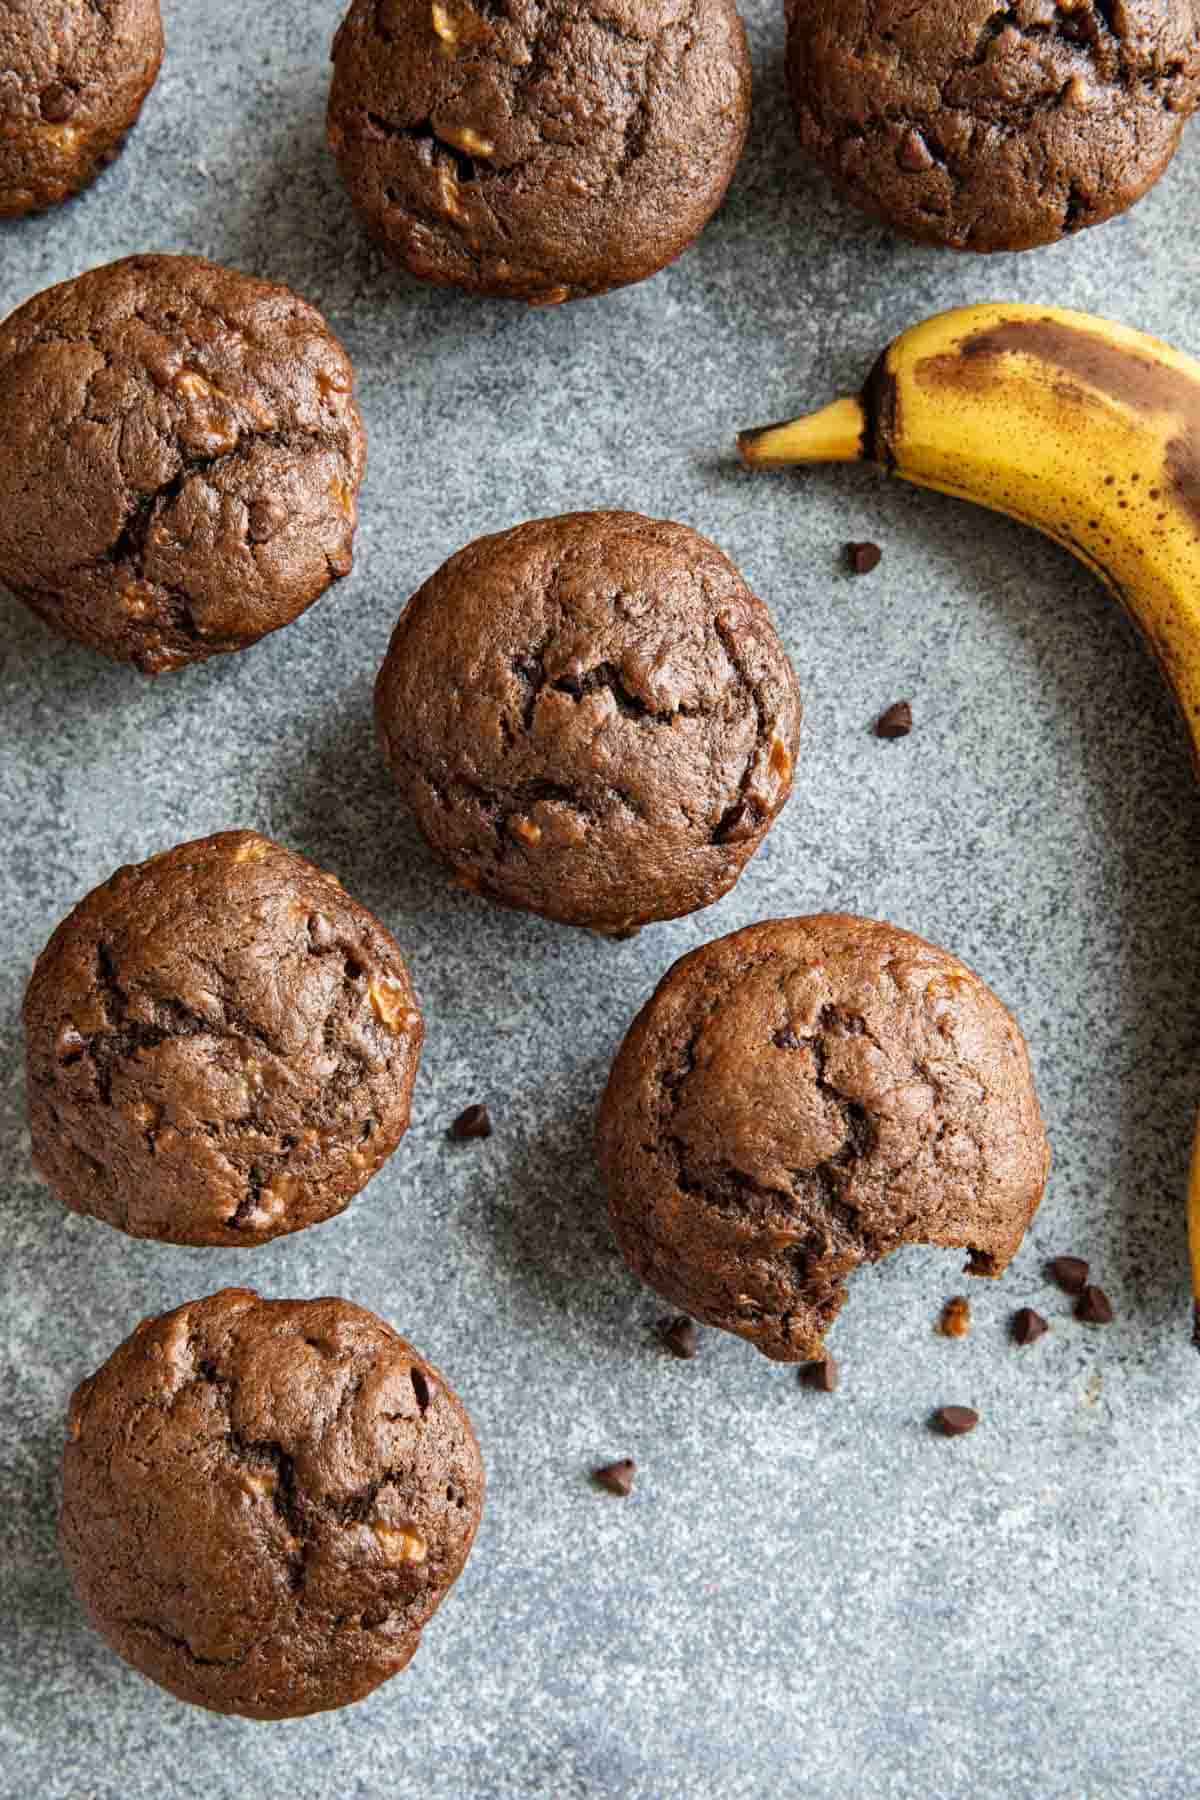 Chocolate banana muffins with a bite taken from one muffin.